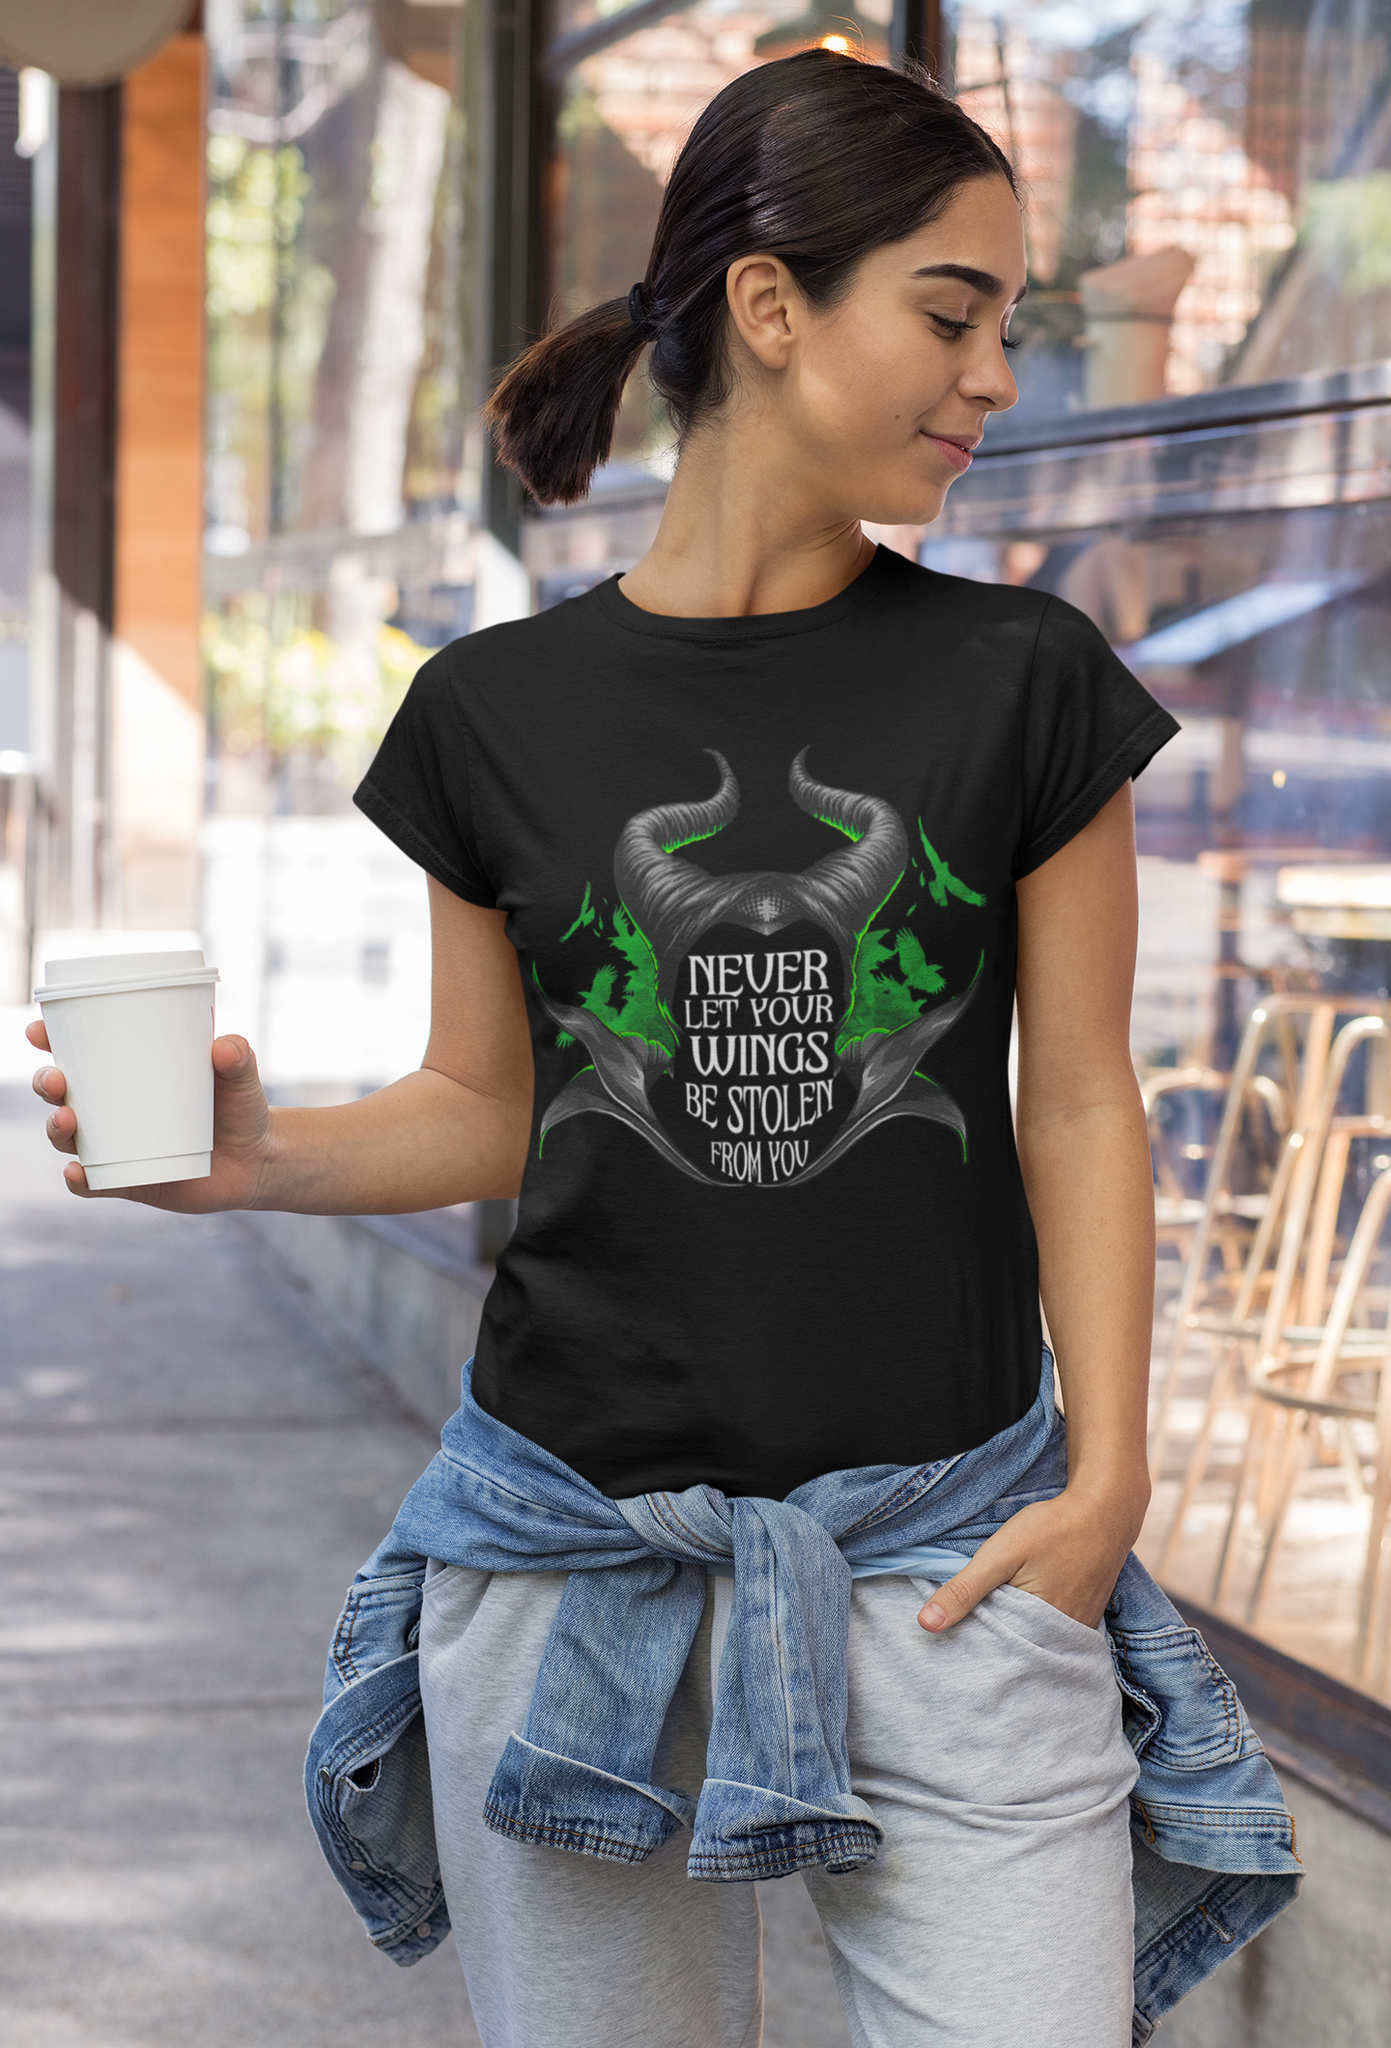 Disney Maleficent T Shirt, Disney Villain T Shirt, Never Let Your Wings Be Stolen From You Tshirt